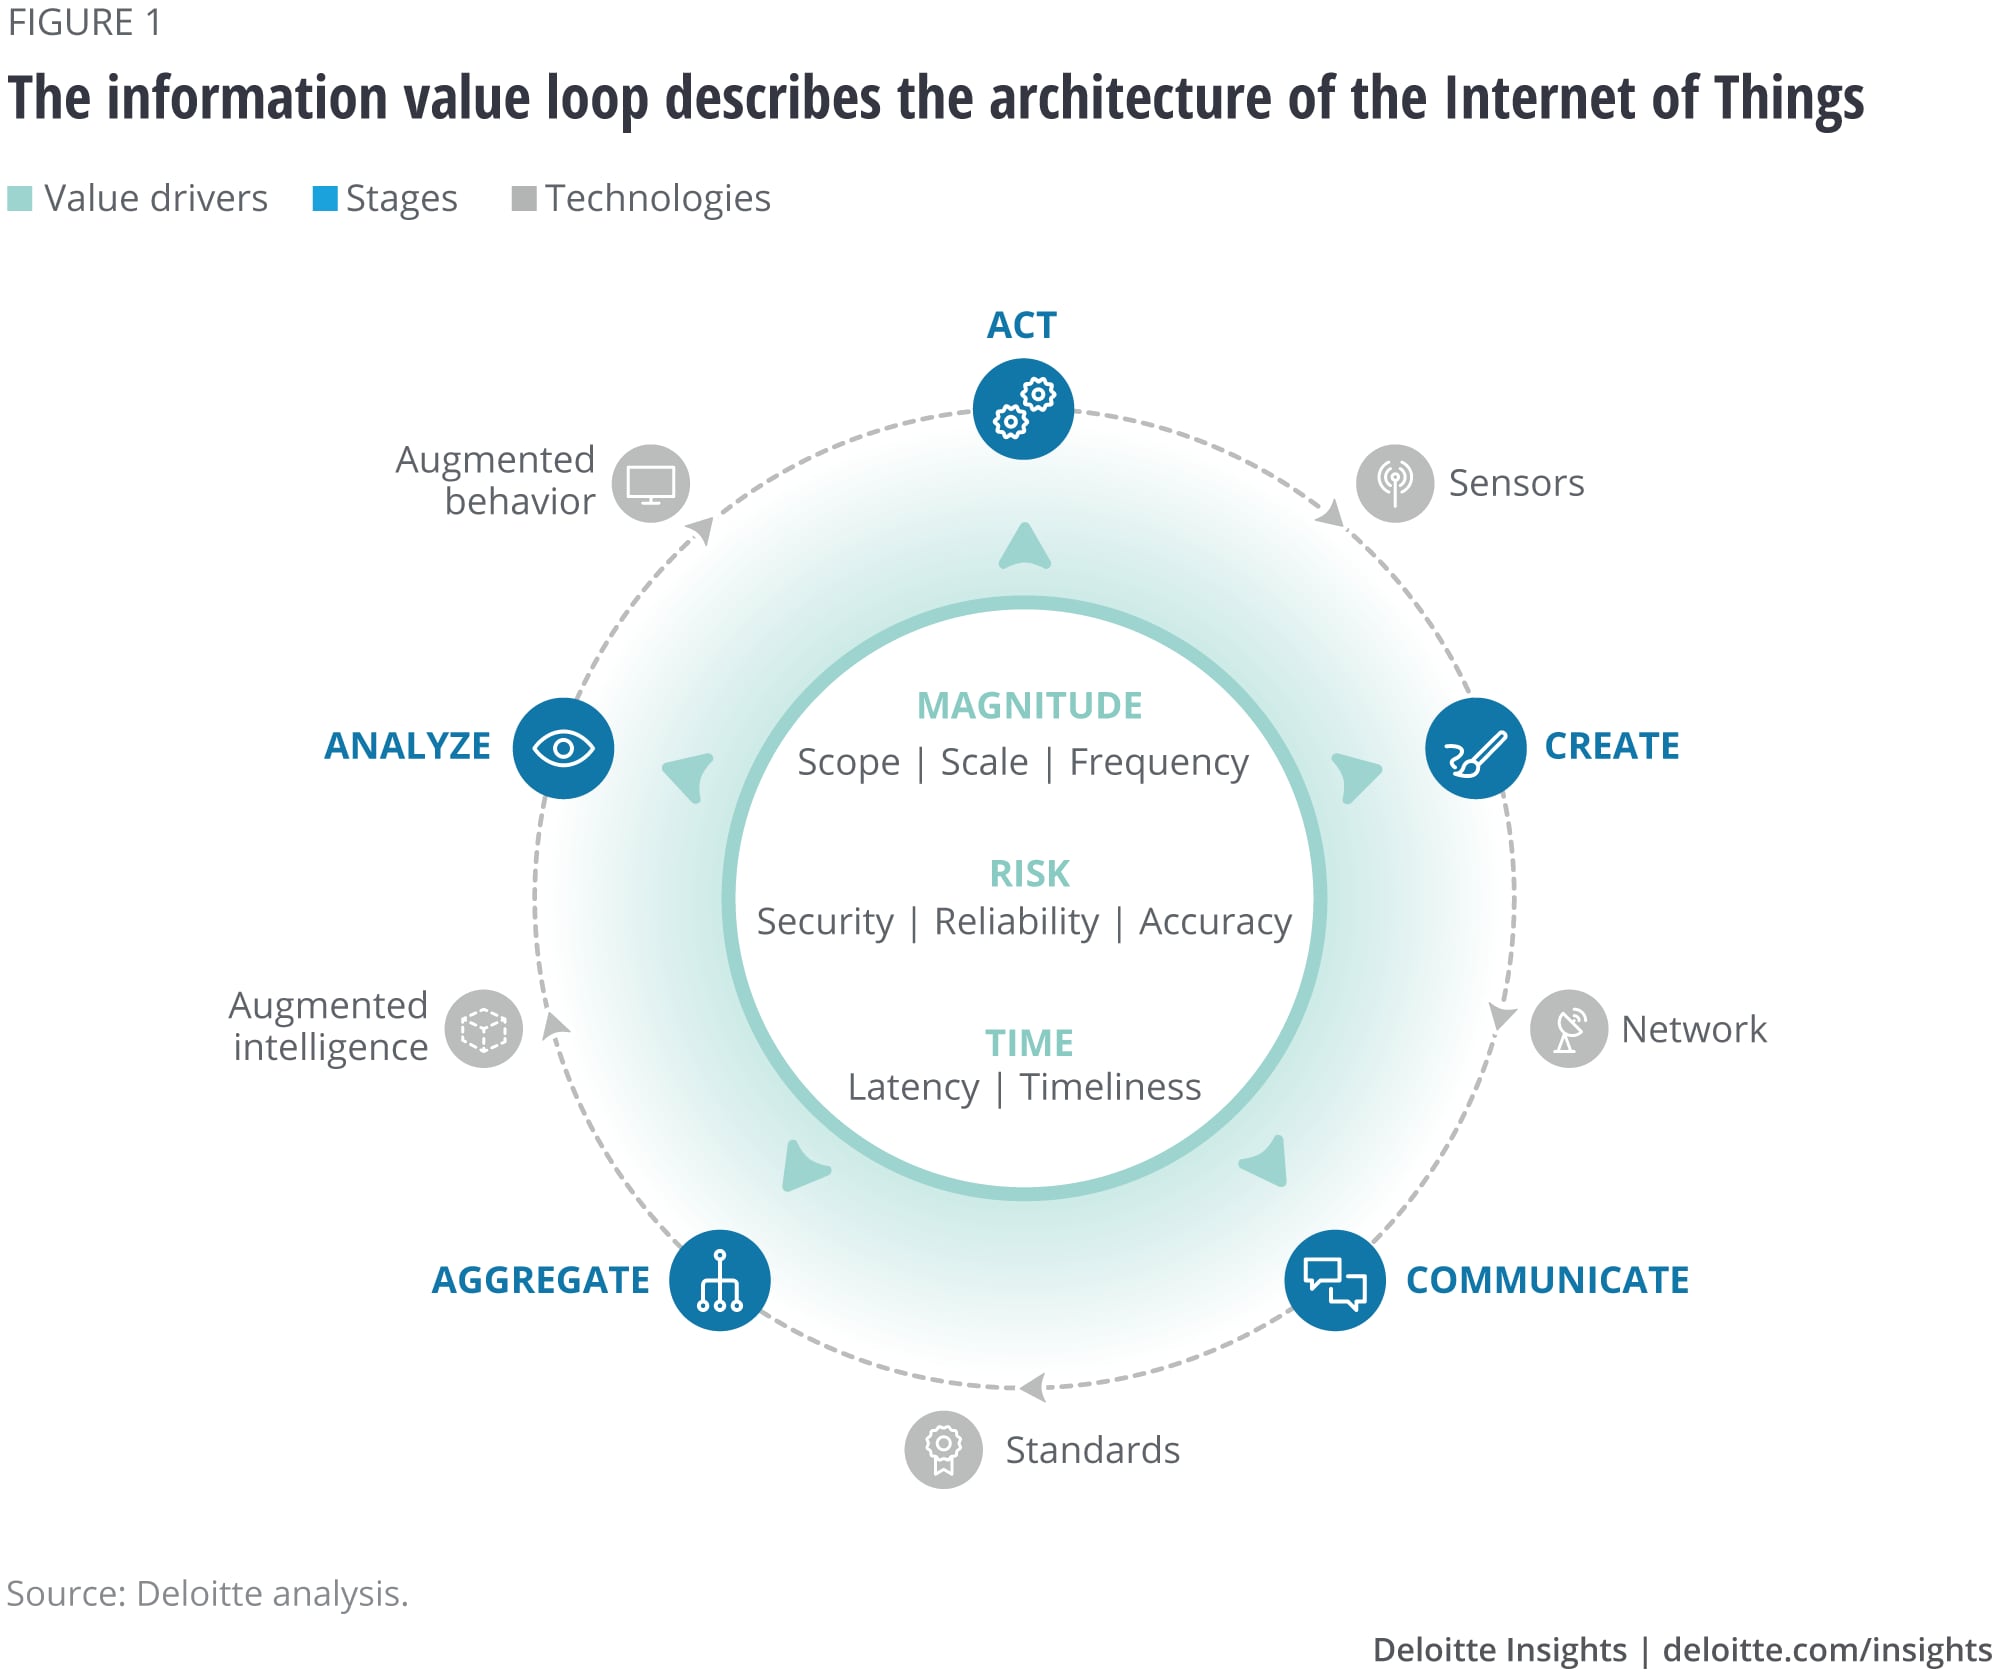 The information value loop describes the architecture of the Internet of Things